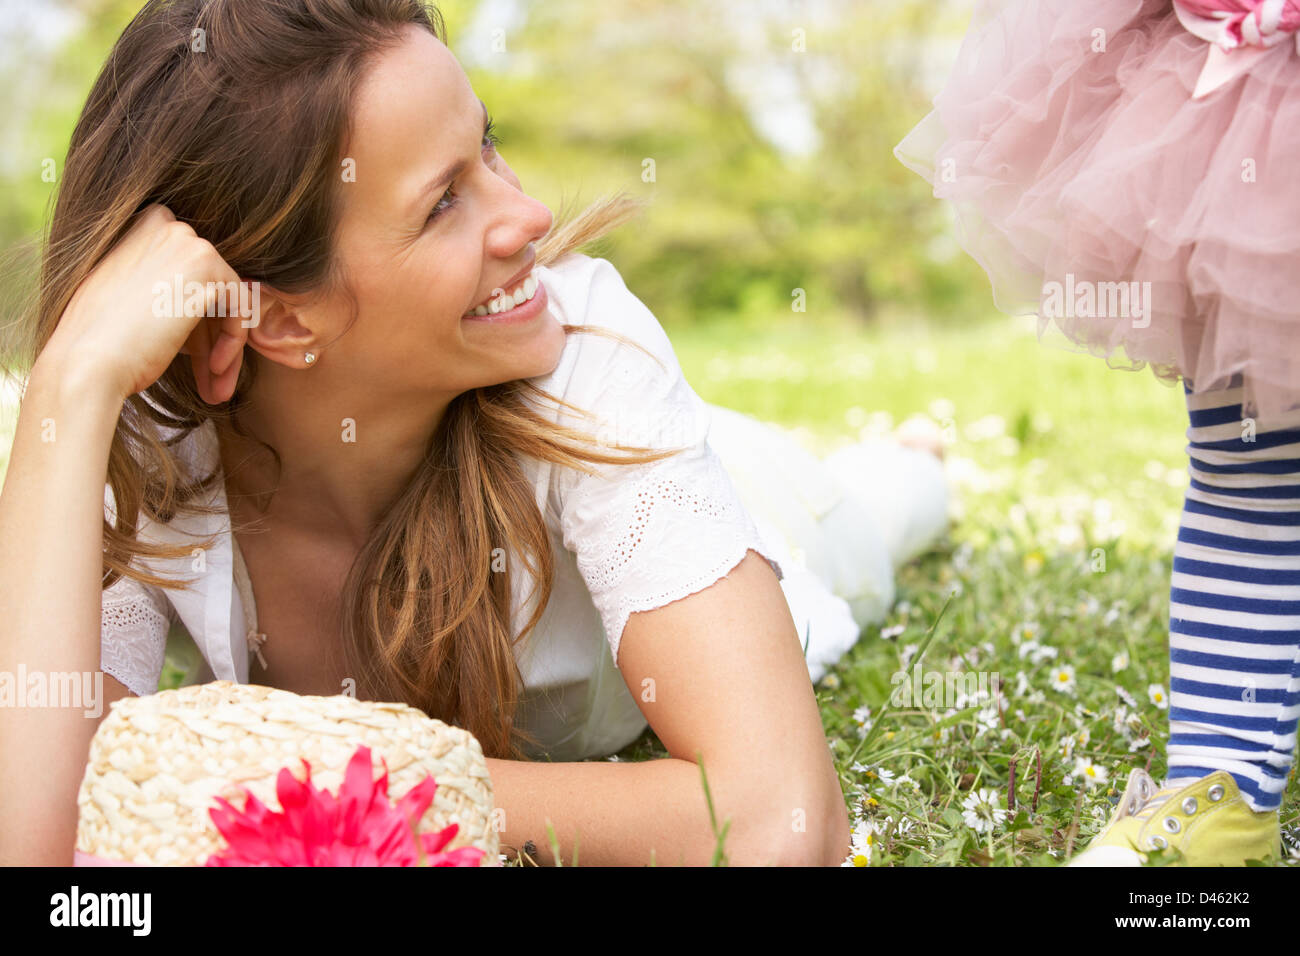 Mother And Daughter In Summer Field Together Stock Photo